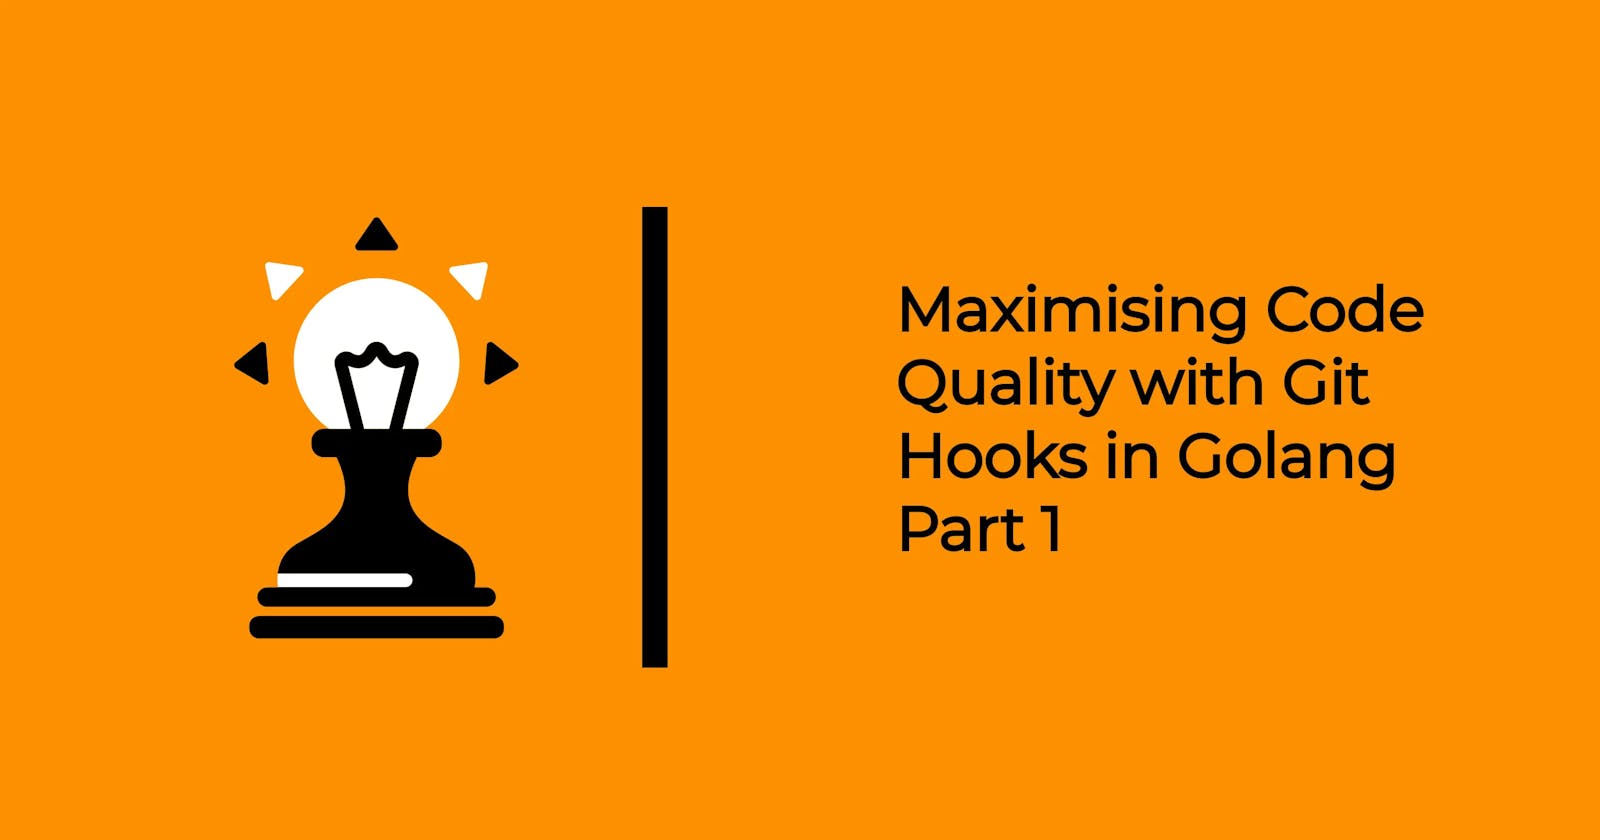 Maximising Code Quality with Git Hooks in Golang Part 1